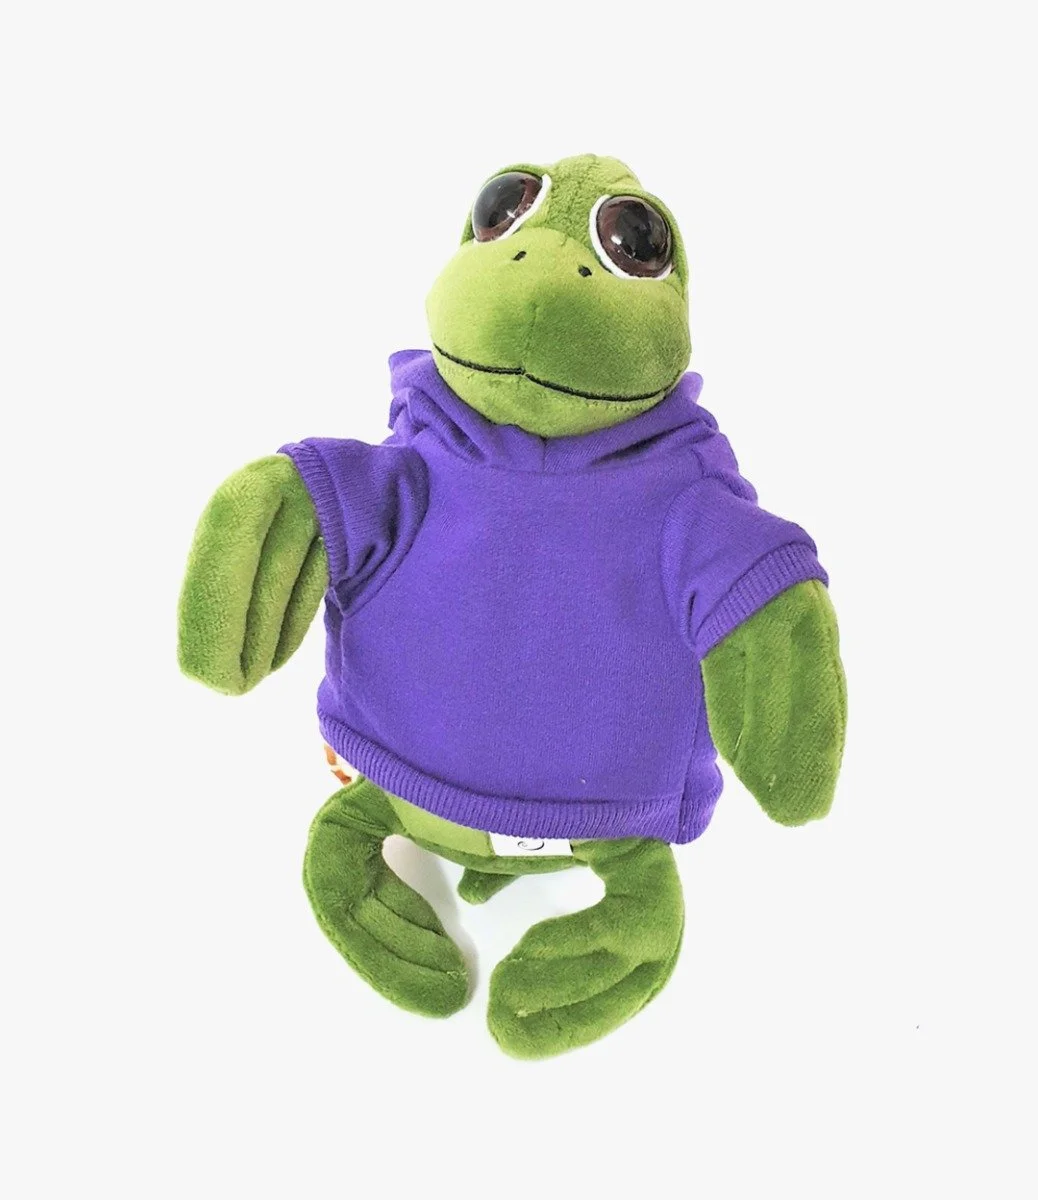 Green Turtle with Purple Hoodie 20cm by Fay Lawson